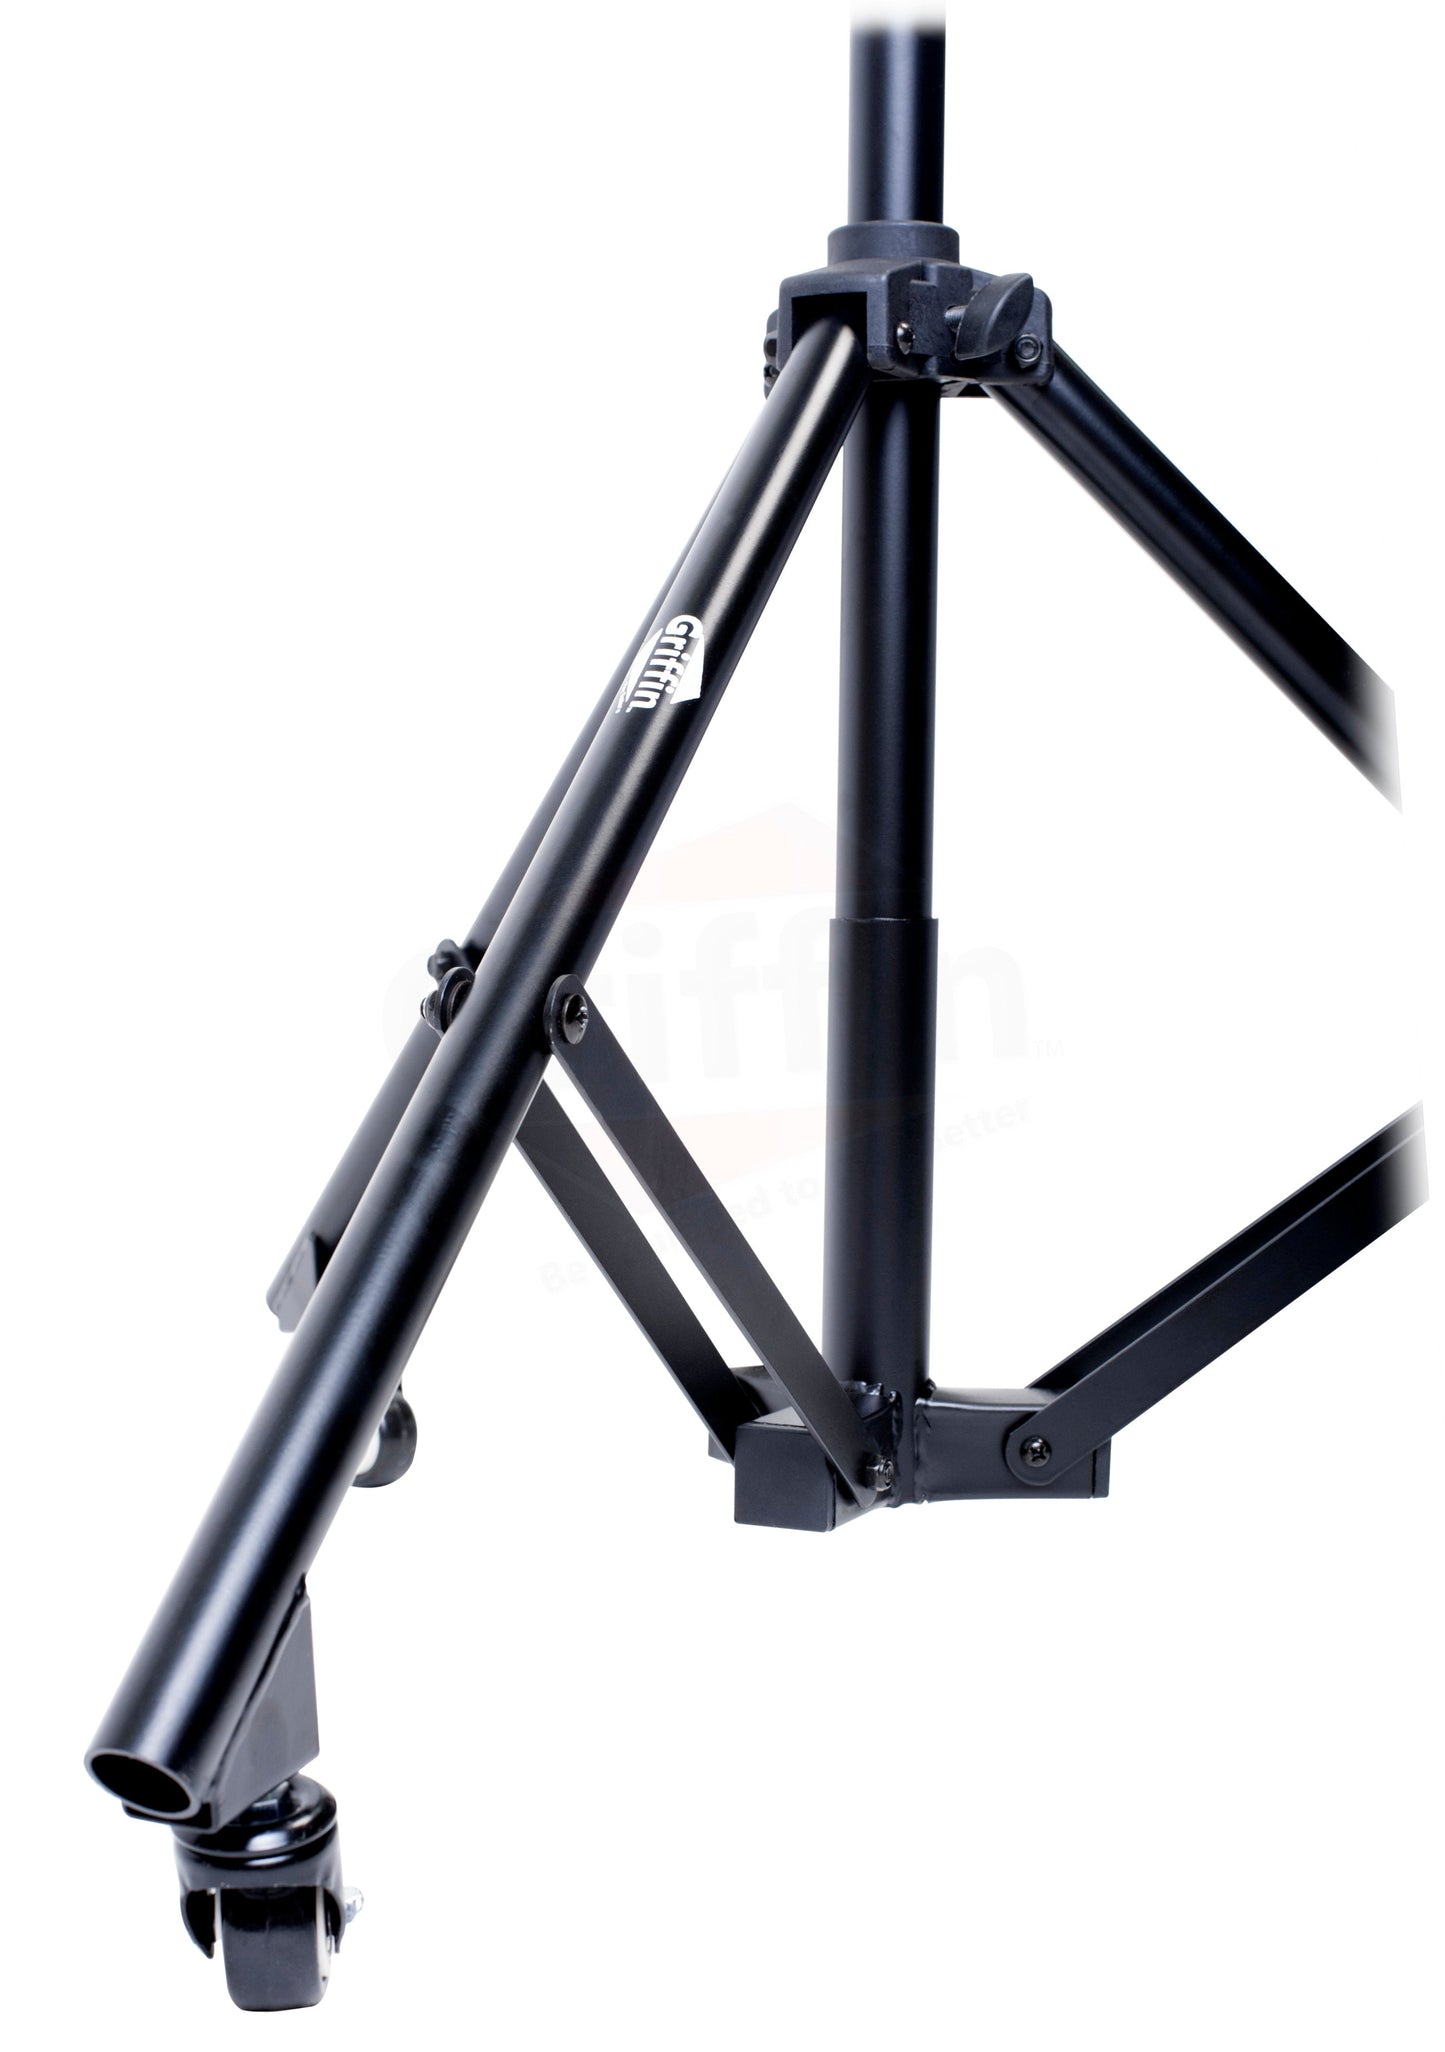 GRIFFIN Professional Studio Microphone Boom Stand with Casters - Extended Height Recording Mic Holder Tripod on Wheels - Tall Telescoping Arm Mount